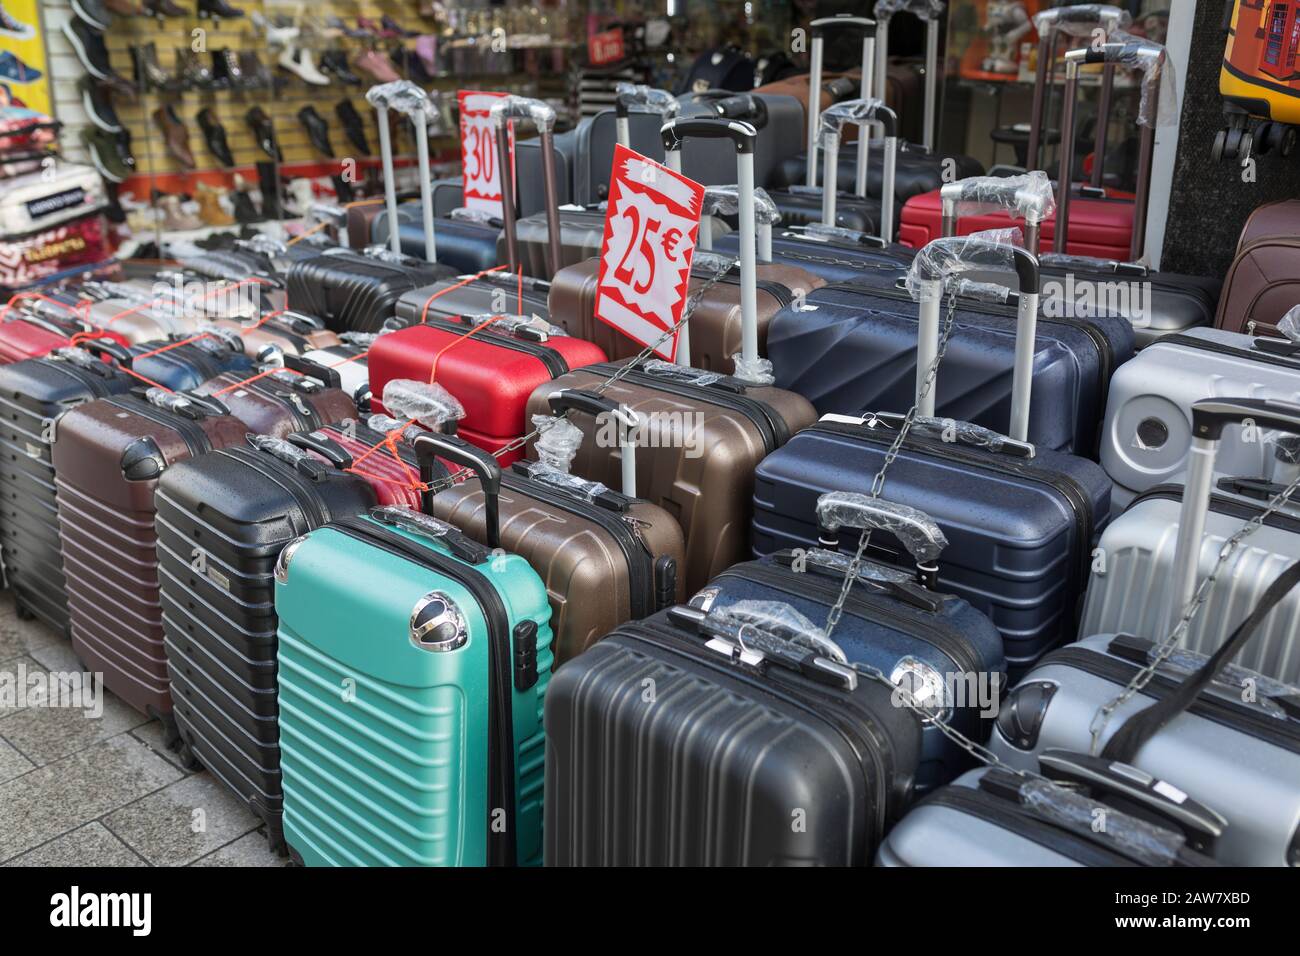 Travel bags and suitcases for sale at shopping street in Antwerp, Belgium Stock Photo